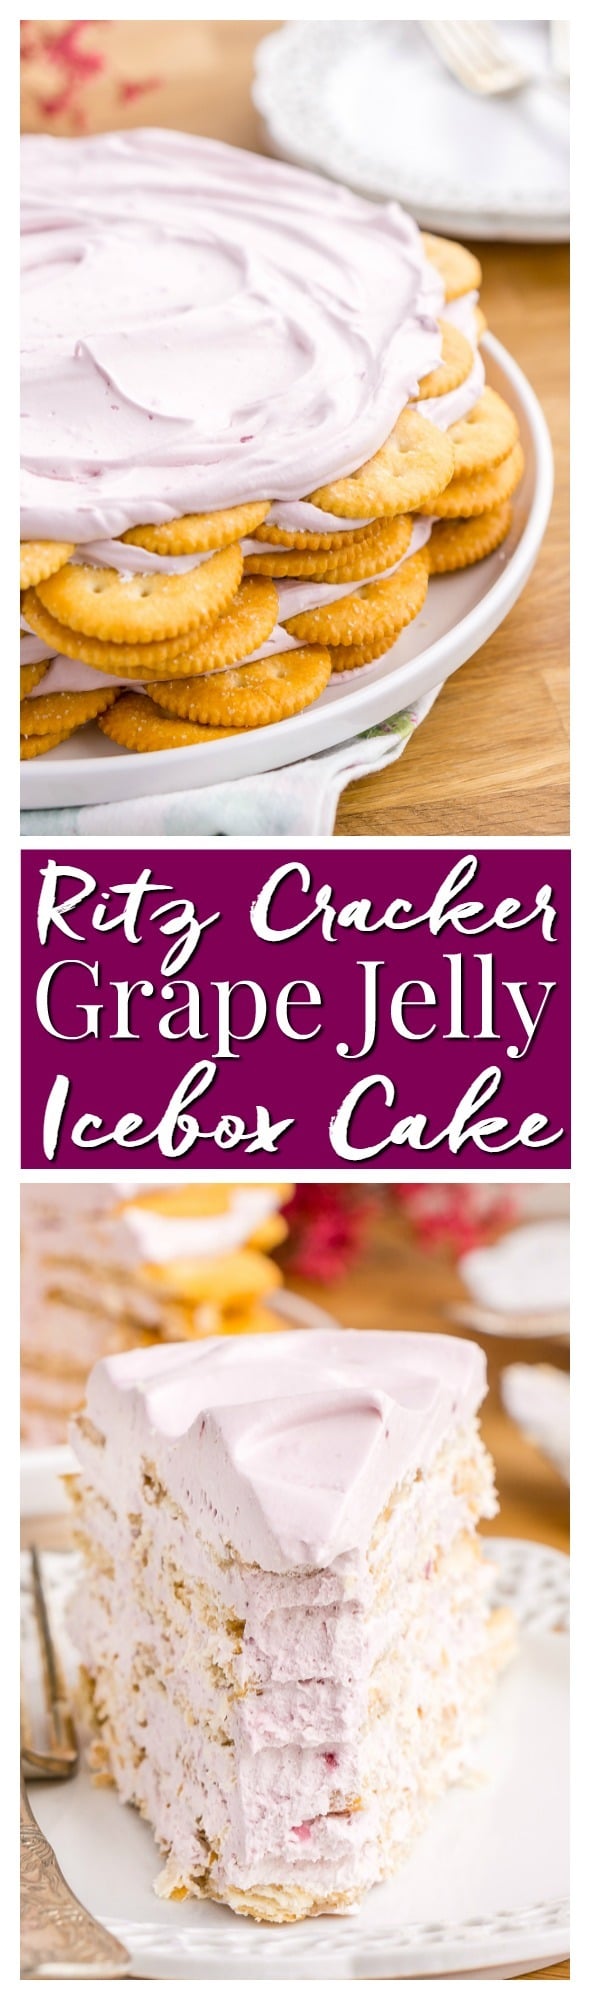 This Ritz Cracker & Grape Jelly Icebox Cake is an old fashioned, no bake, 3-ingredient dessert the whole family will love! It's super EASY to make and you can whip it up the day before! via @sugarandsoulco